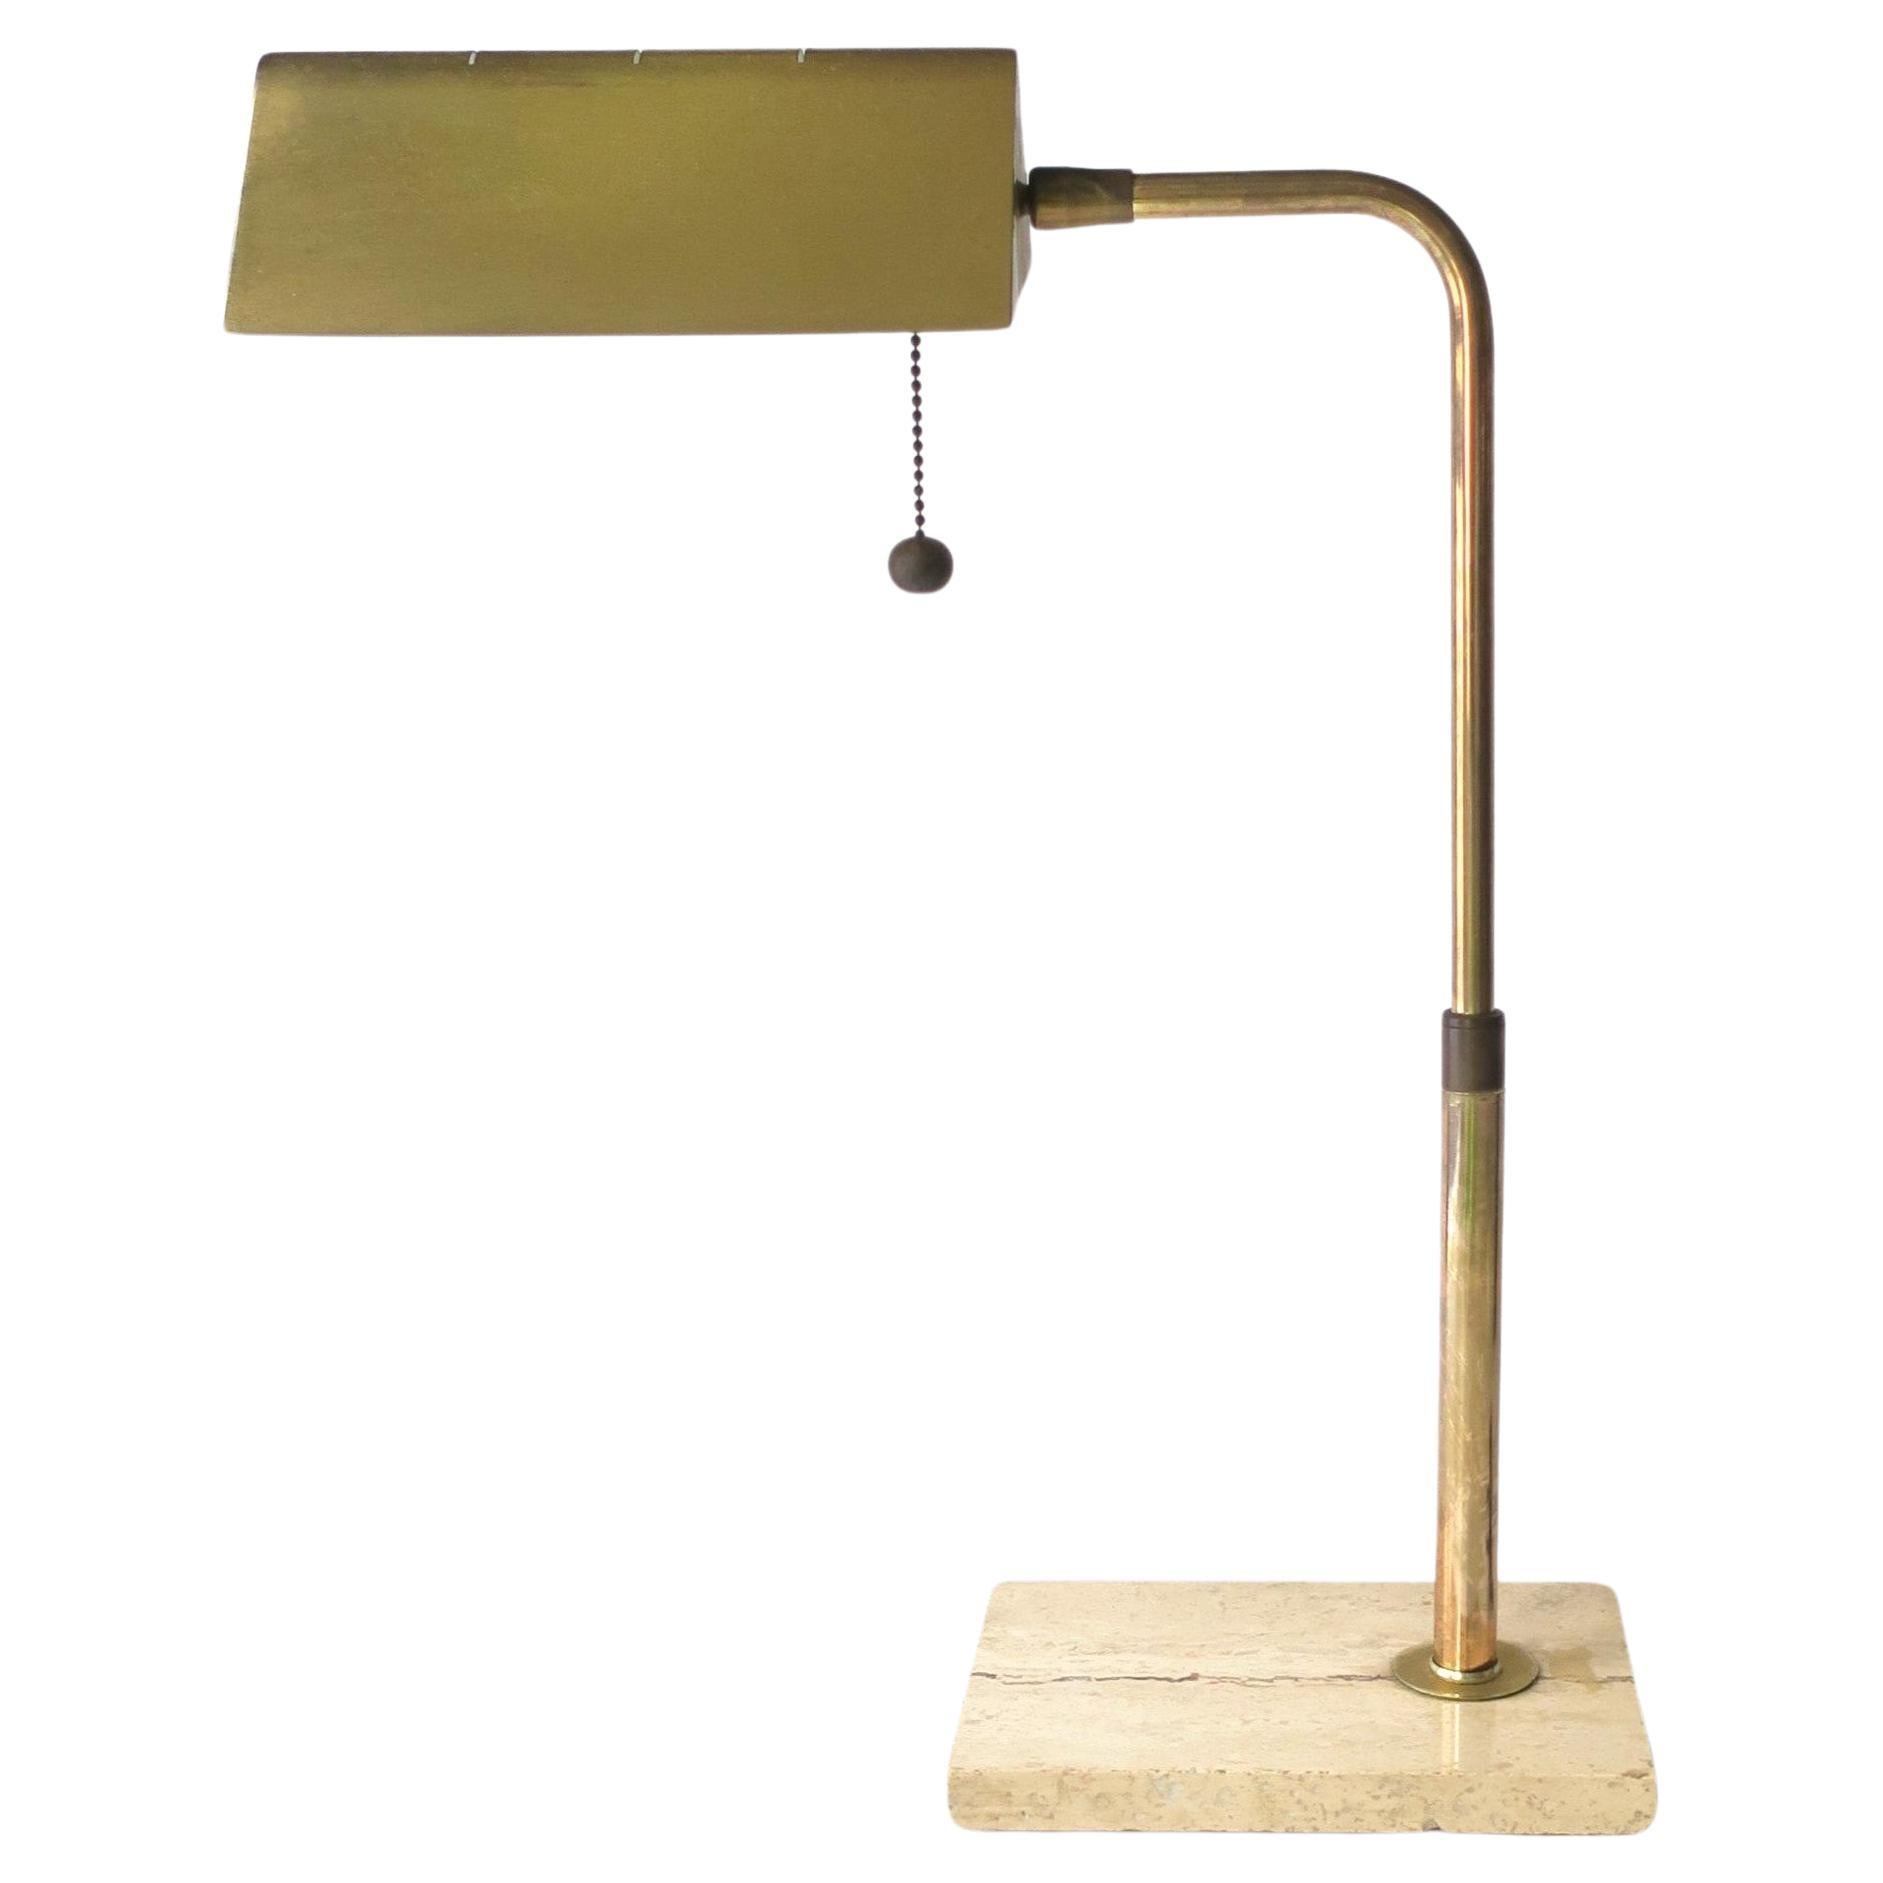 Italian Brass and Travertine Marble Desk or Table Lamp, circa 1960s 1970s For Sale